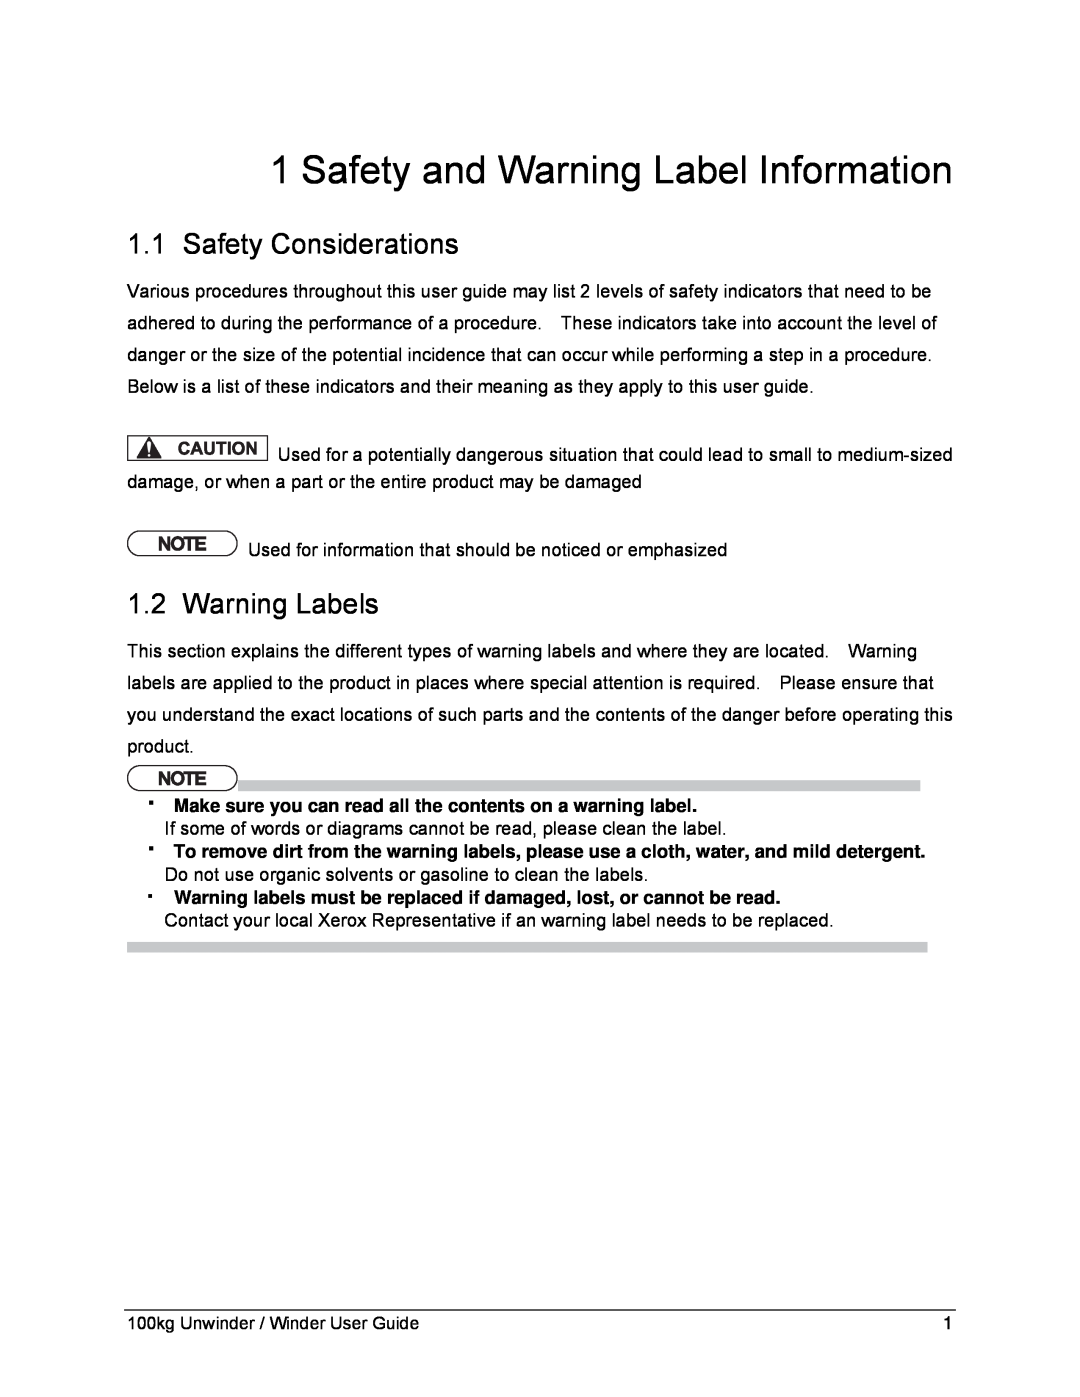 Xerox 8254E, 8264E manual Safety and Warning Label Information, Safety Considerations, Warning Labels 